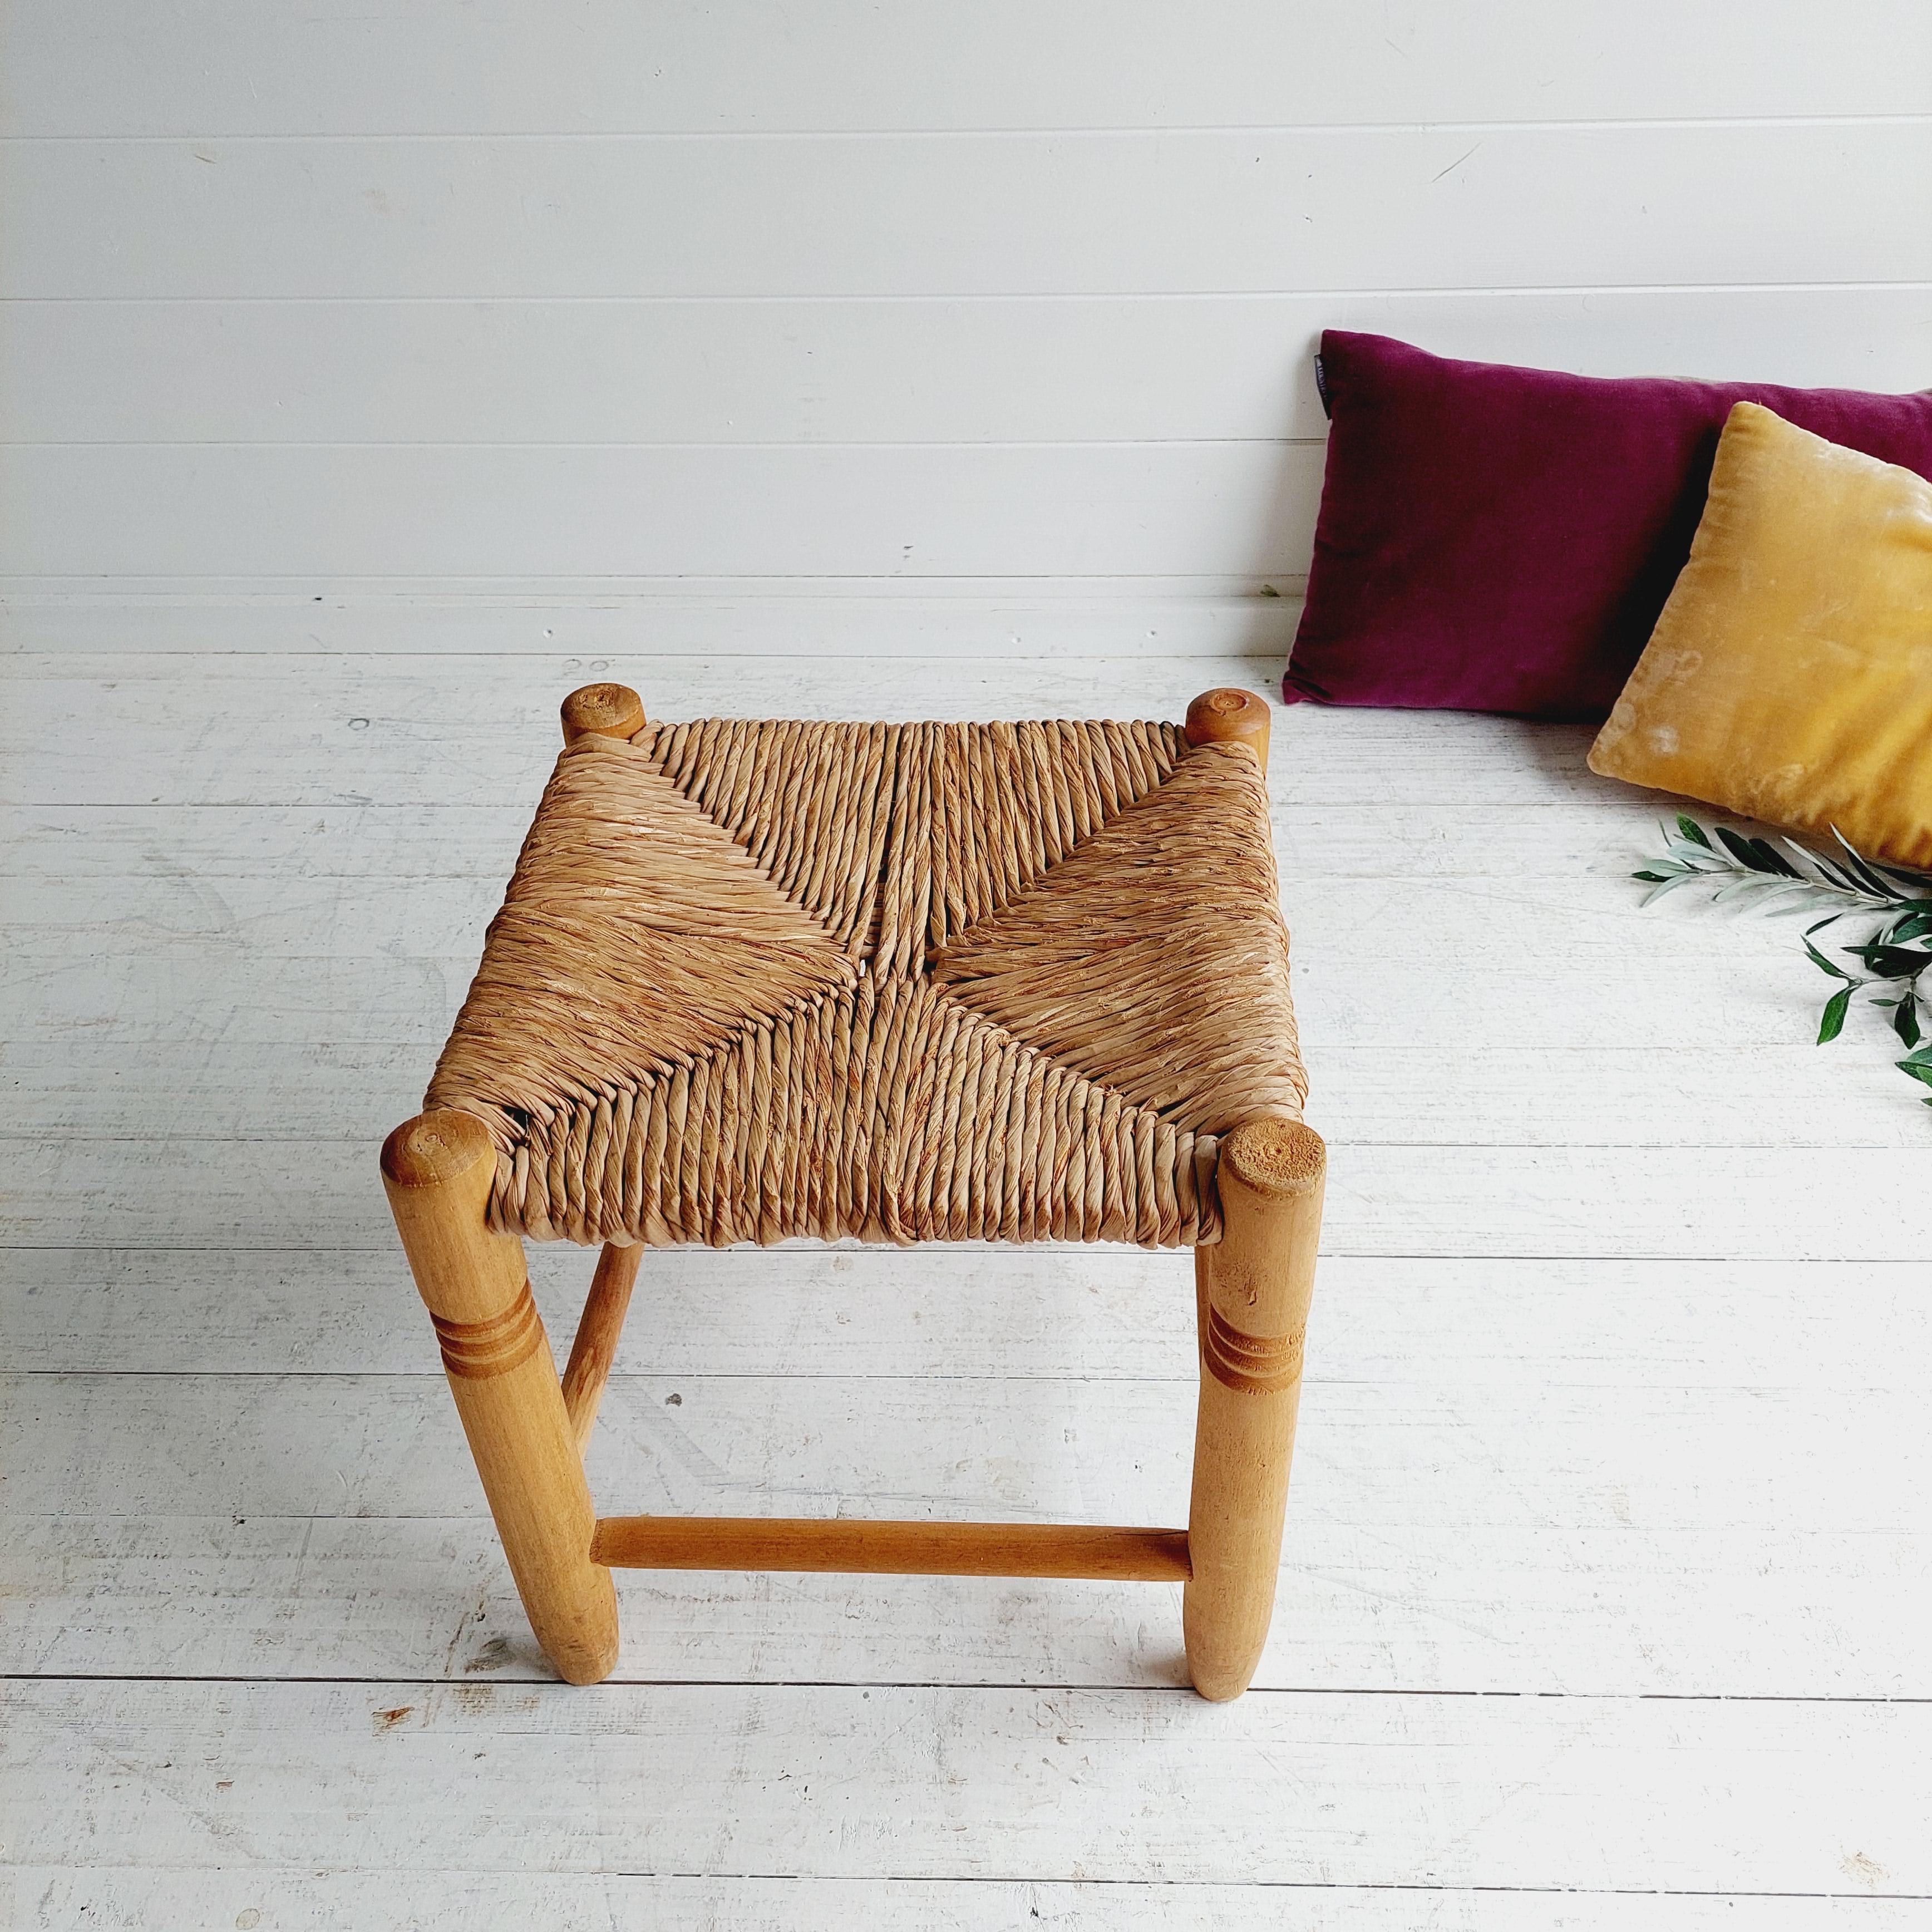 20th Century Mid Century Scandinavian Rustic Wood And Straw Stool Charlotte Perriand Style 50